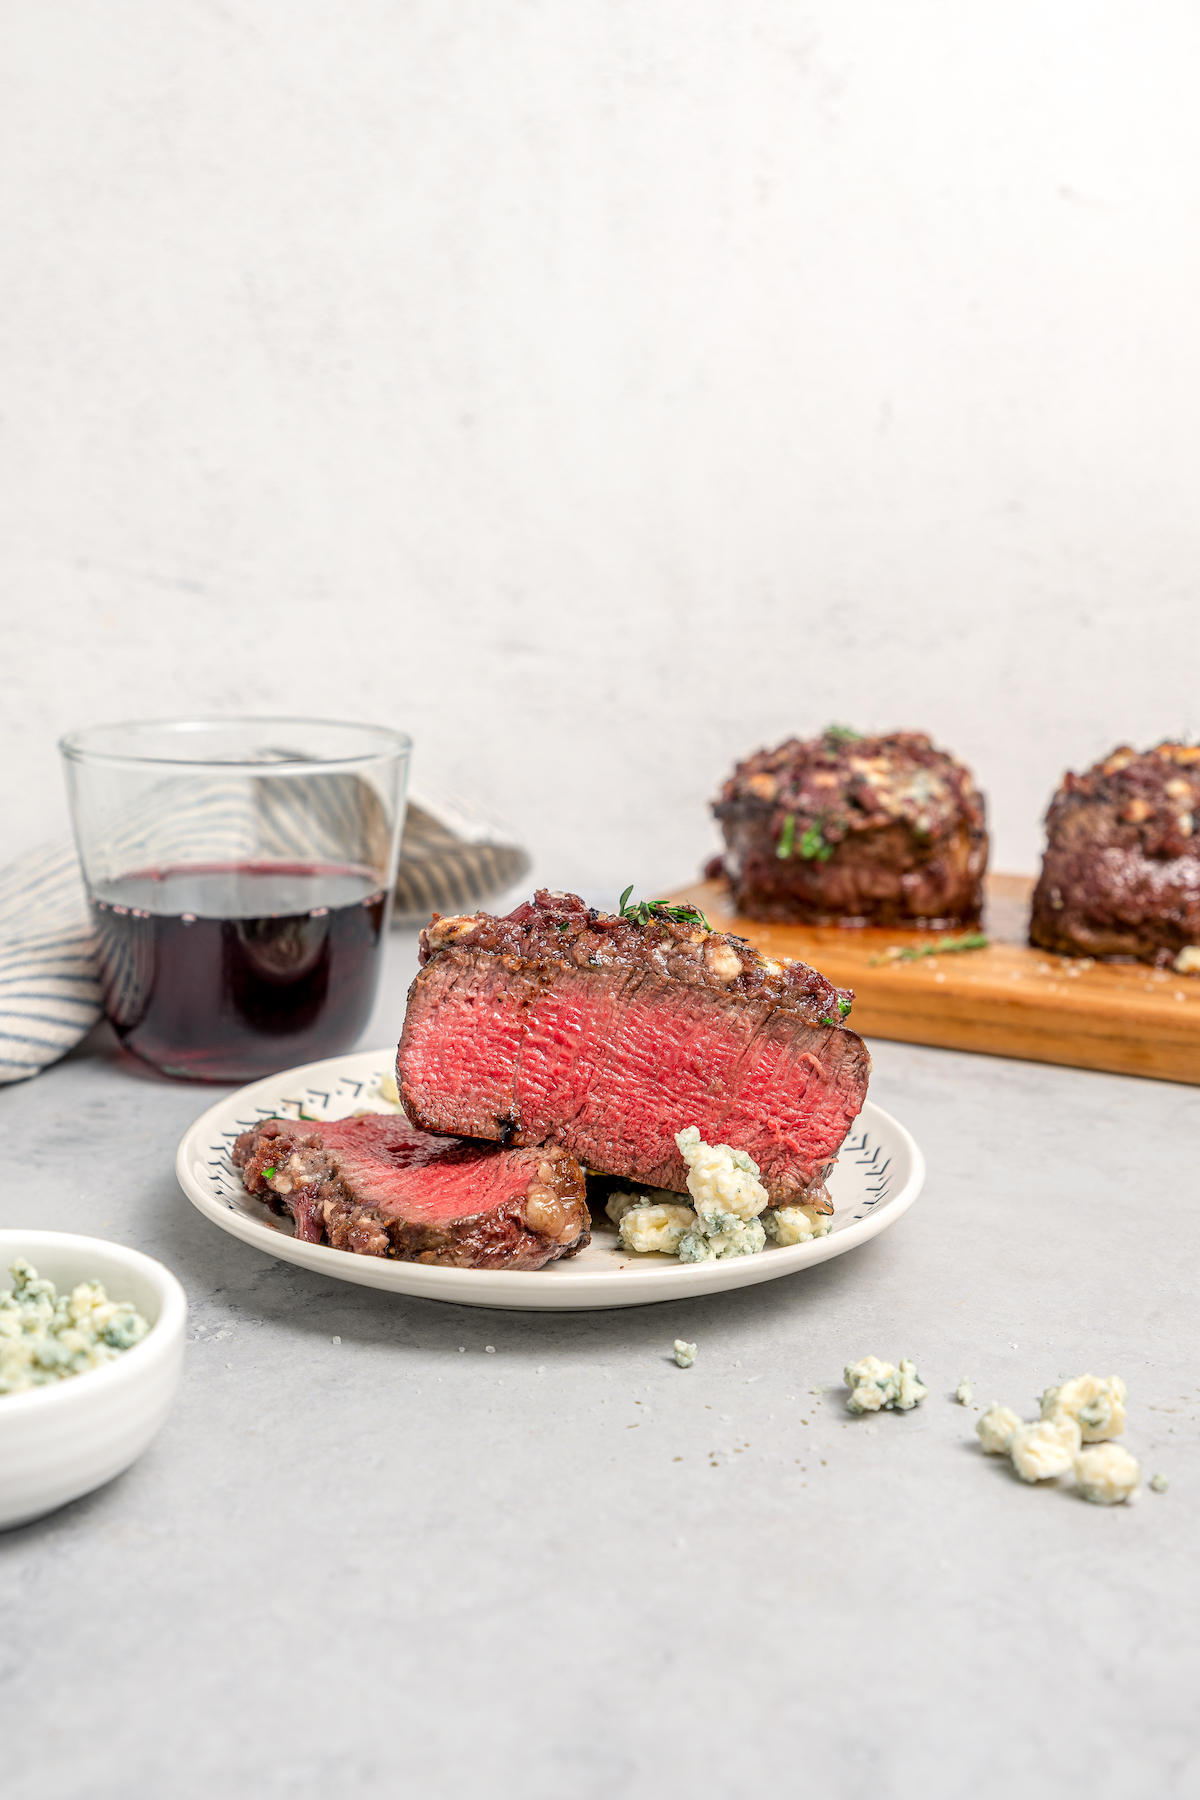 A glass of red wine next to a wooden board with blue cheese crusted steak. One piece of steak has been served on a small plate.